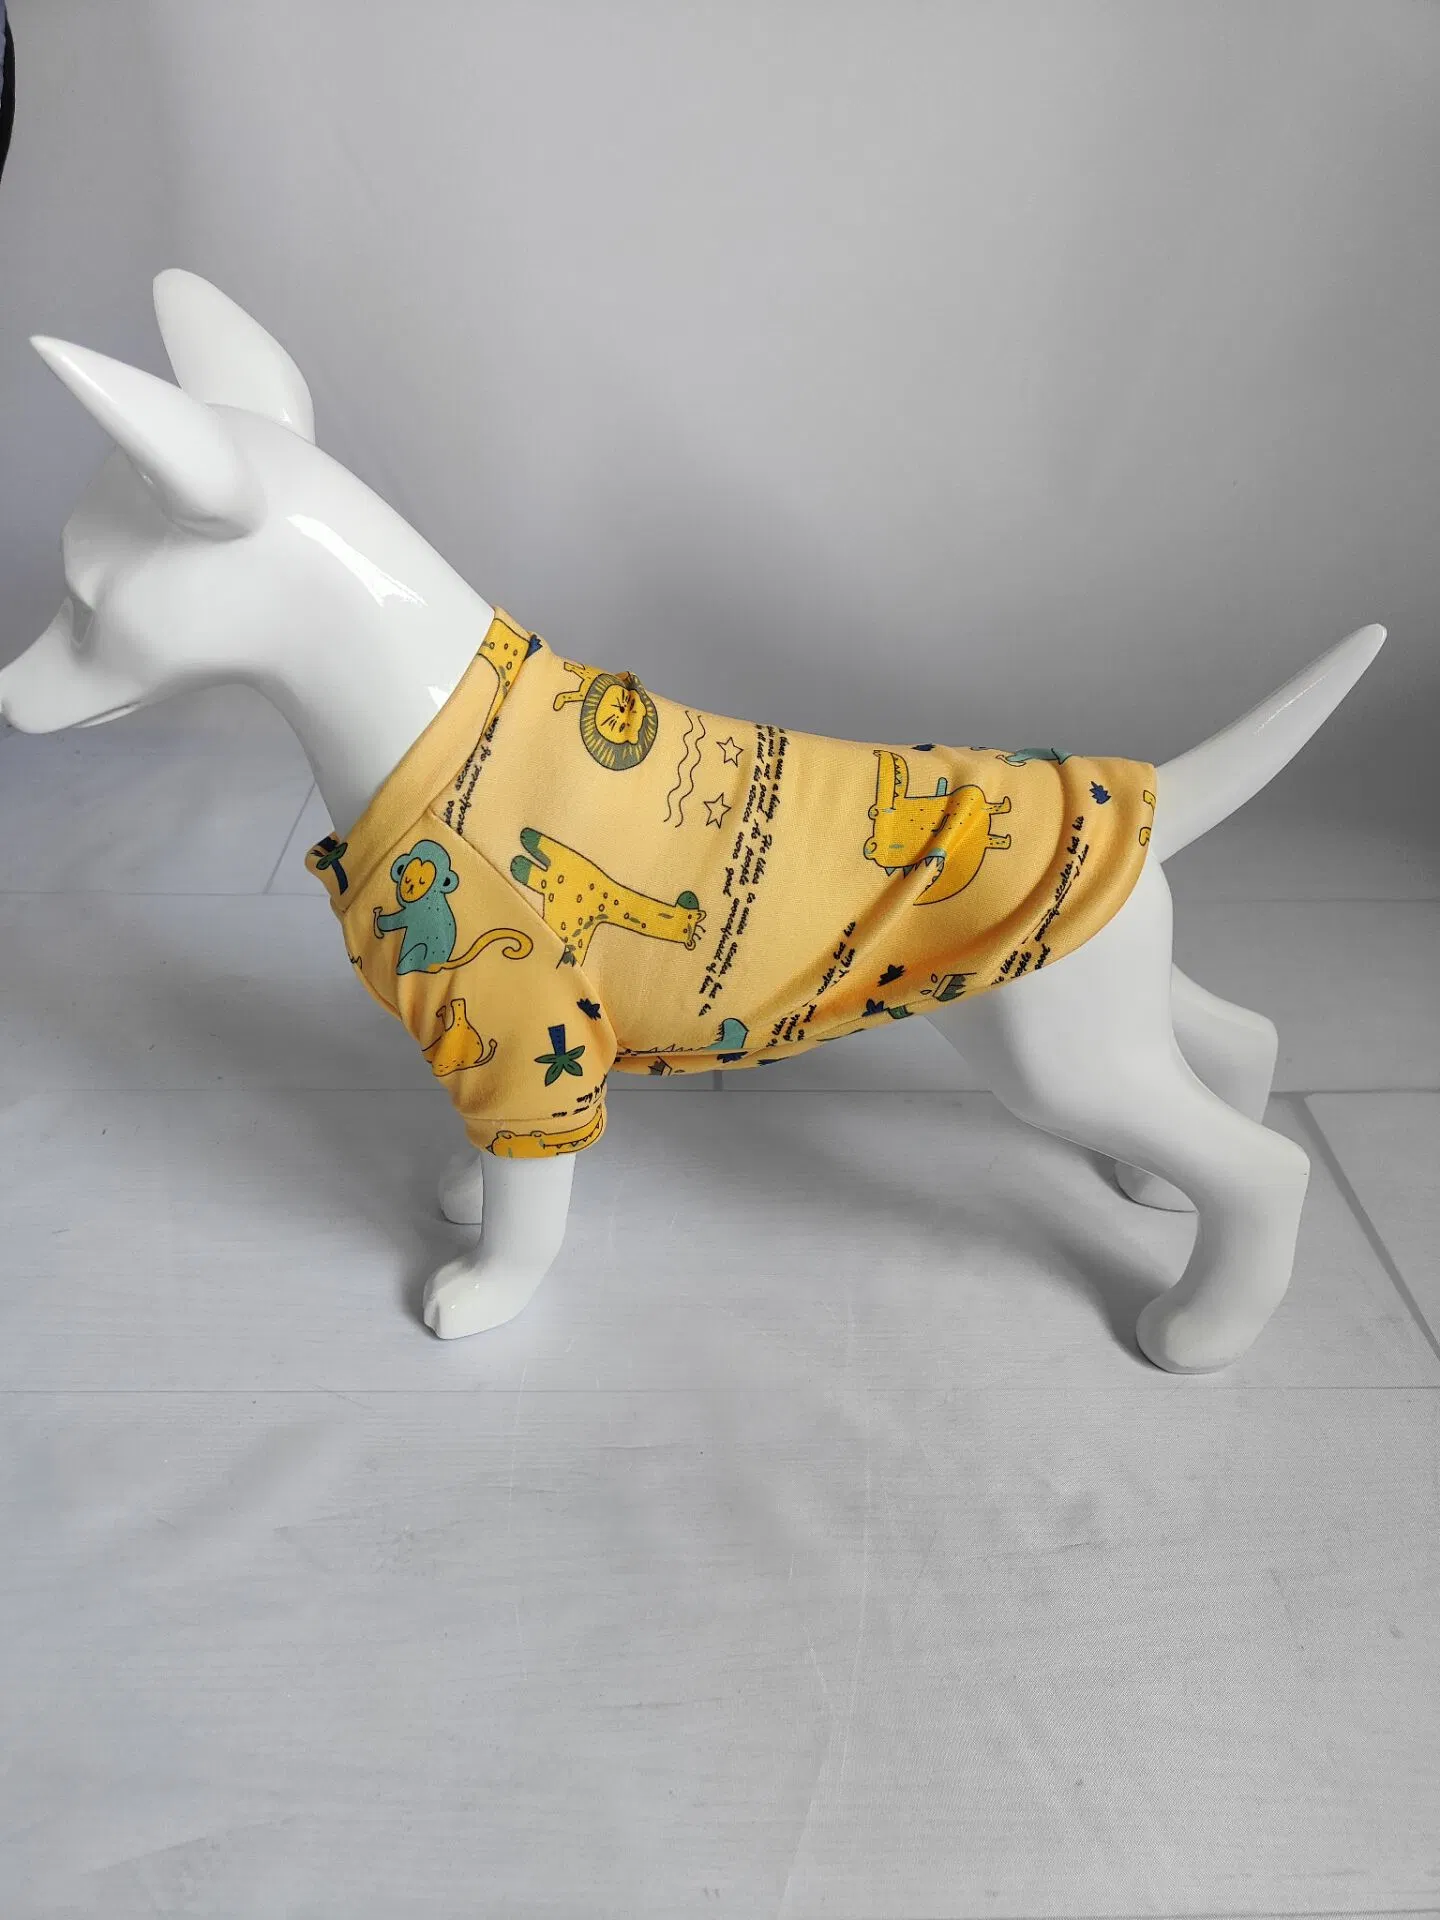 Printed Clothes for Dog Warm Pet Jumpsuit Fleece Pajama for Small Dogs Cat Clothing Pet Coat Jacket Winter Puppy Clothes